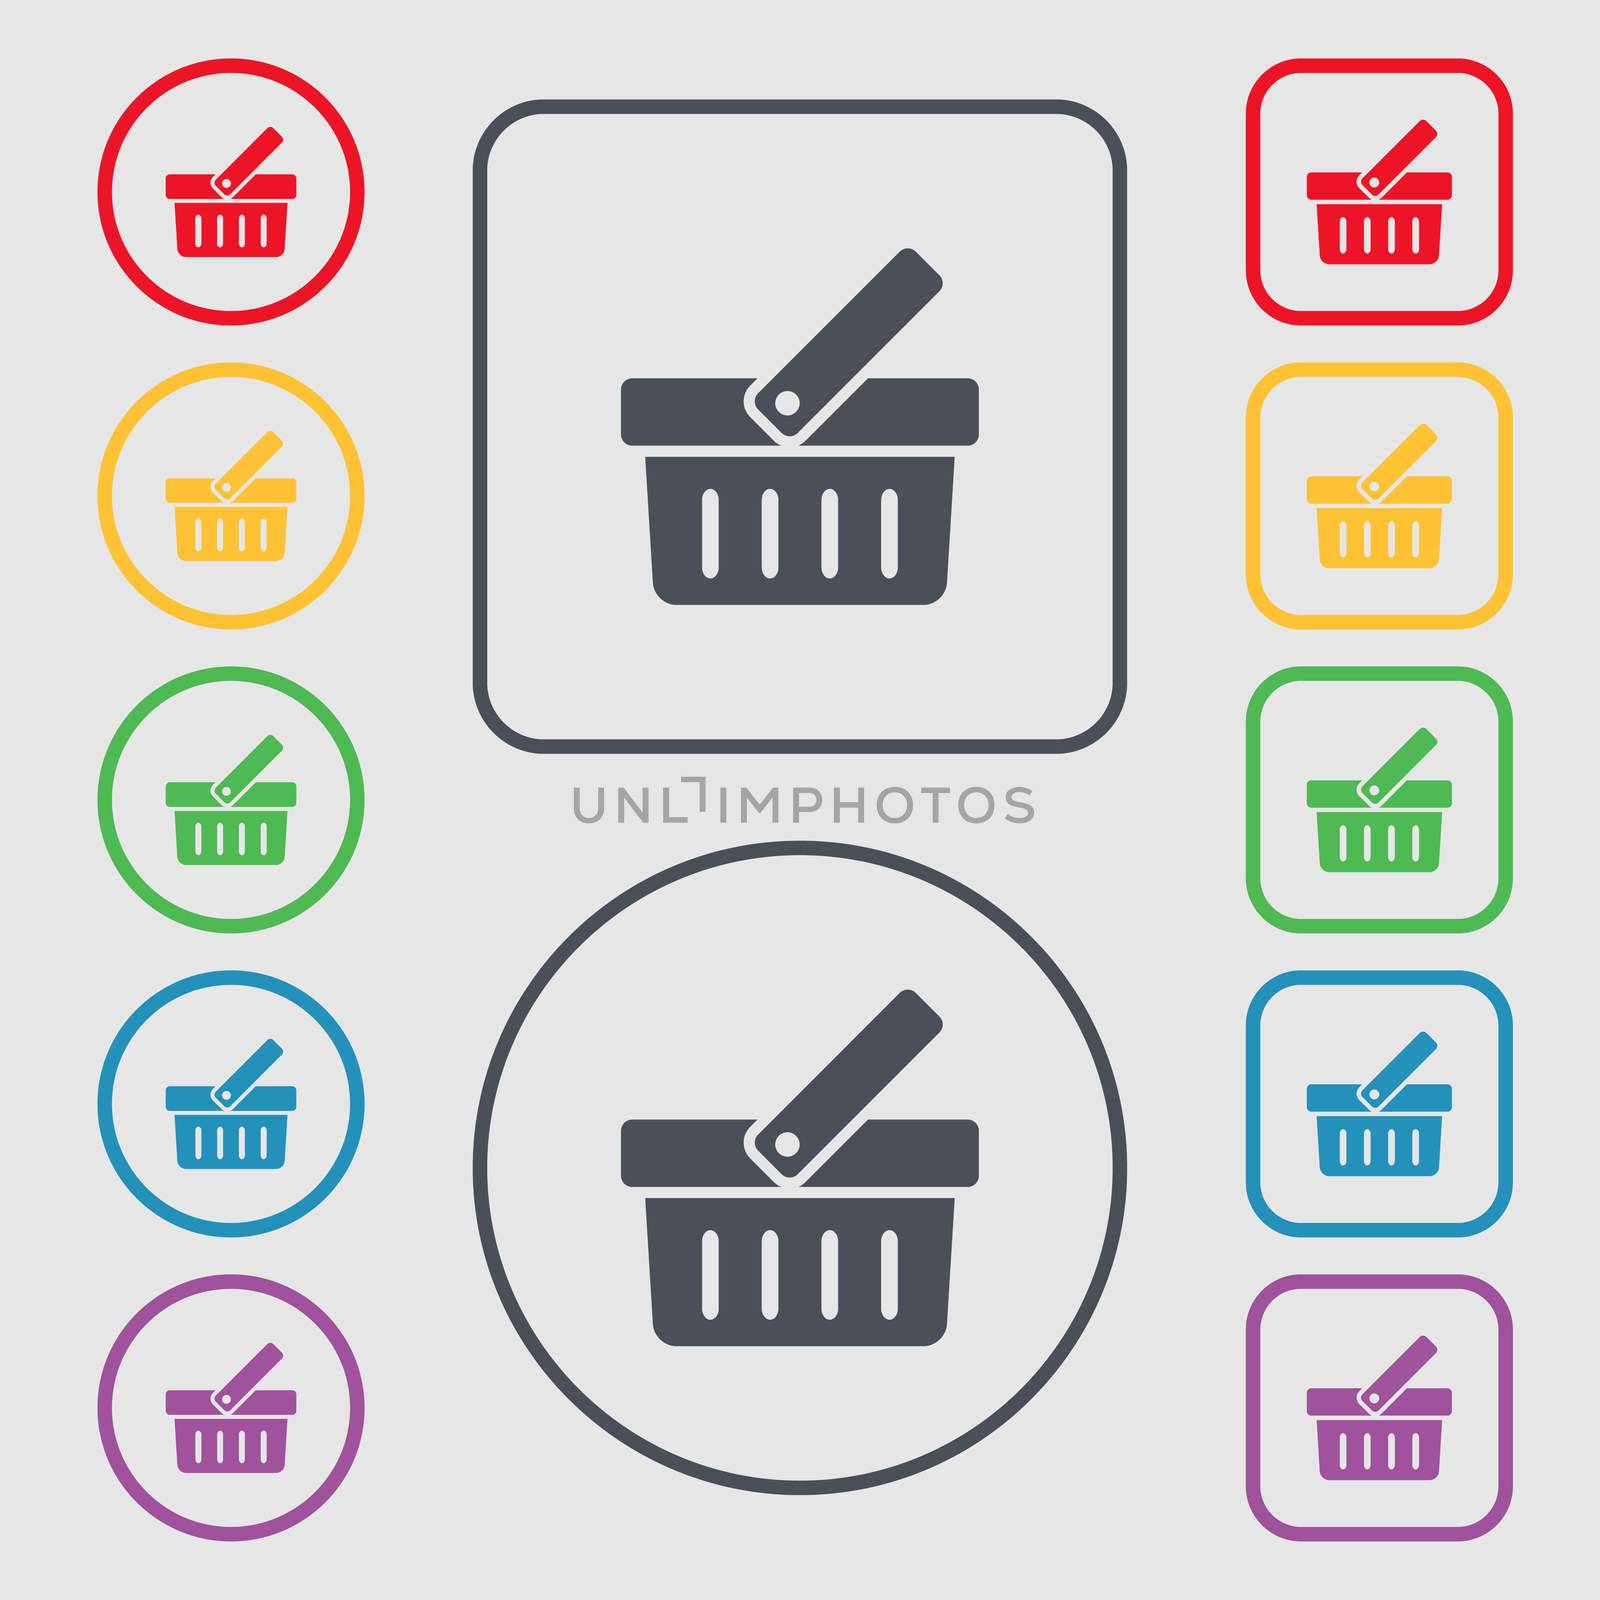 Shopping Cart sign icon. Online buying button. Symbols on the Round and square buttons with frame. illustration